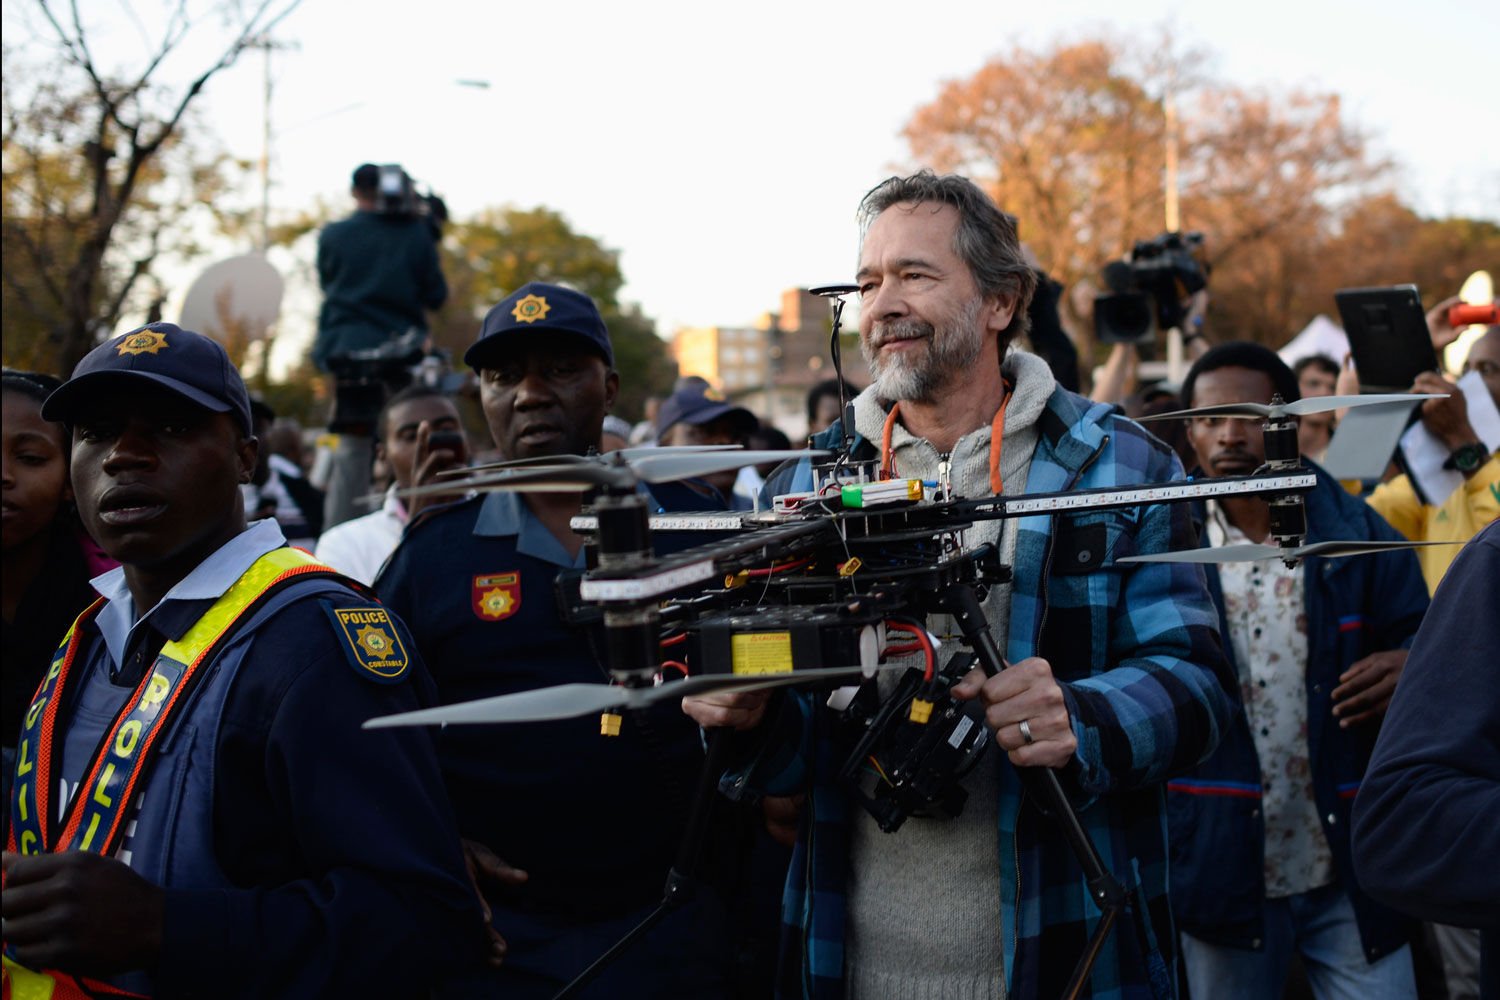 Police detain FC Hamman carrying a radio-controlled helicopter drone with a camera that was filming scenes around the Pretoria hospital where Nelson Mandela is being treated. (Dylan Martinez, Reuters)